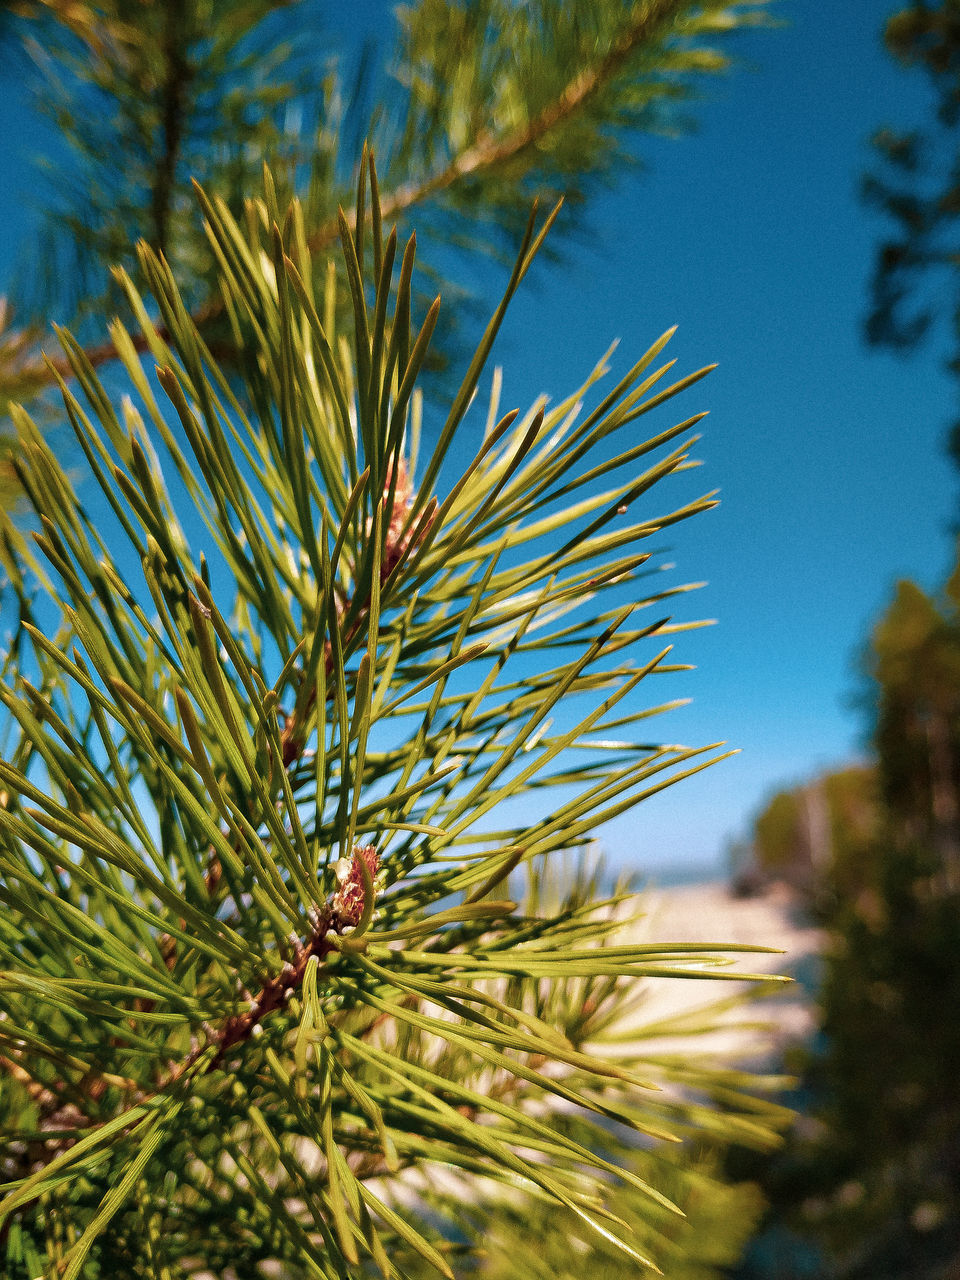 plant, growth, tree, beauty in nature, pine tree, close-up, focus on foreground, nature, day, no people, green color, coniferous tree, tranquility, branch, outdoors, selective focus, needle - plant part, sky, leaf, sunlight, spiky